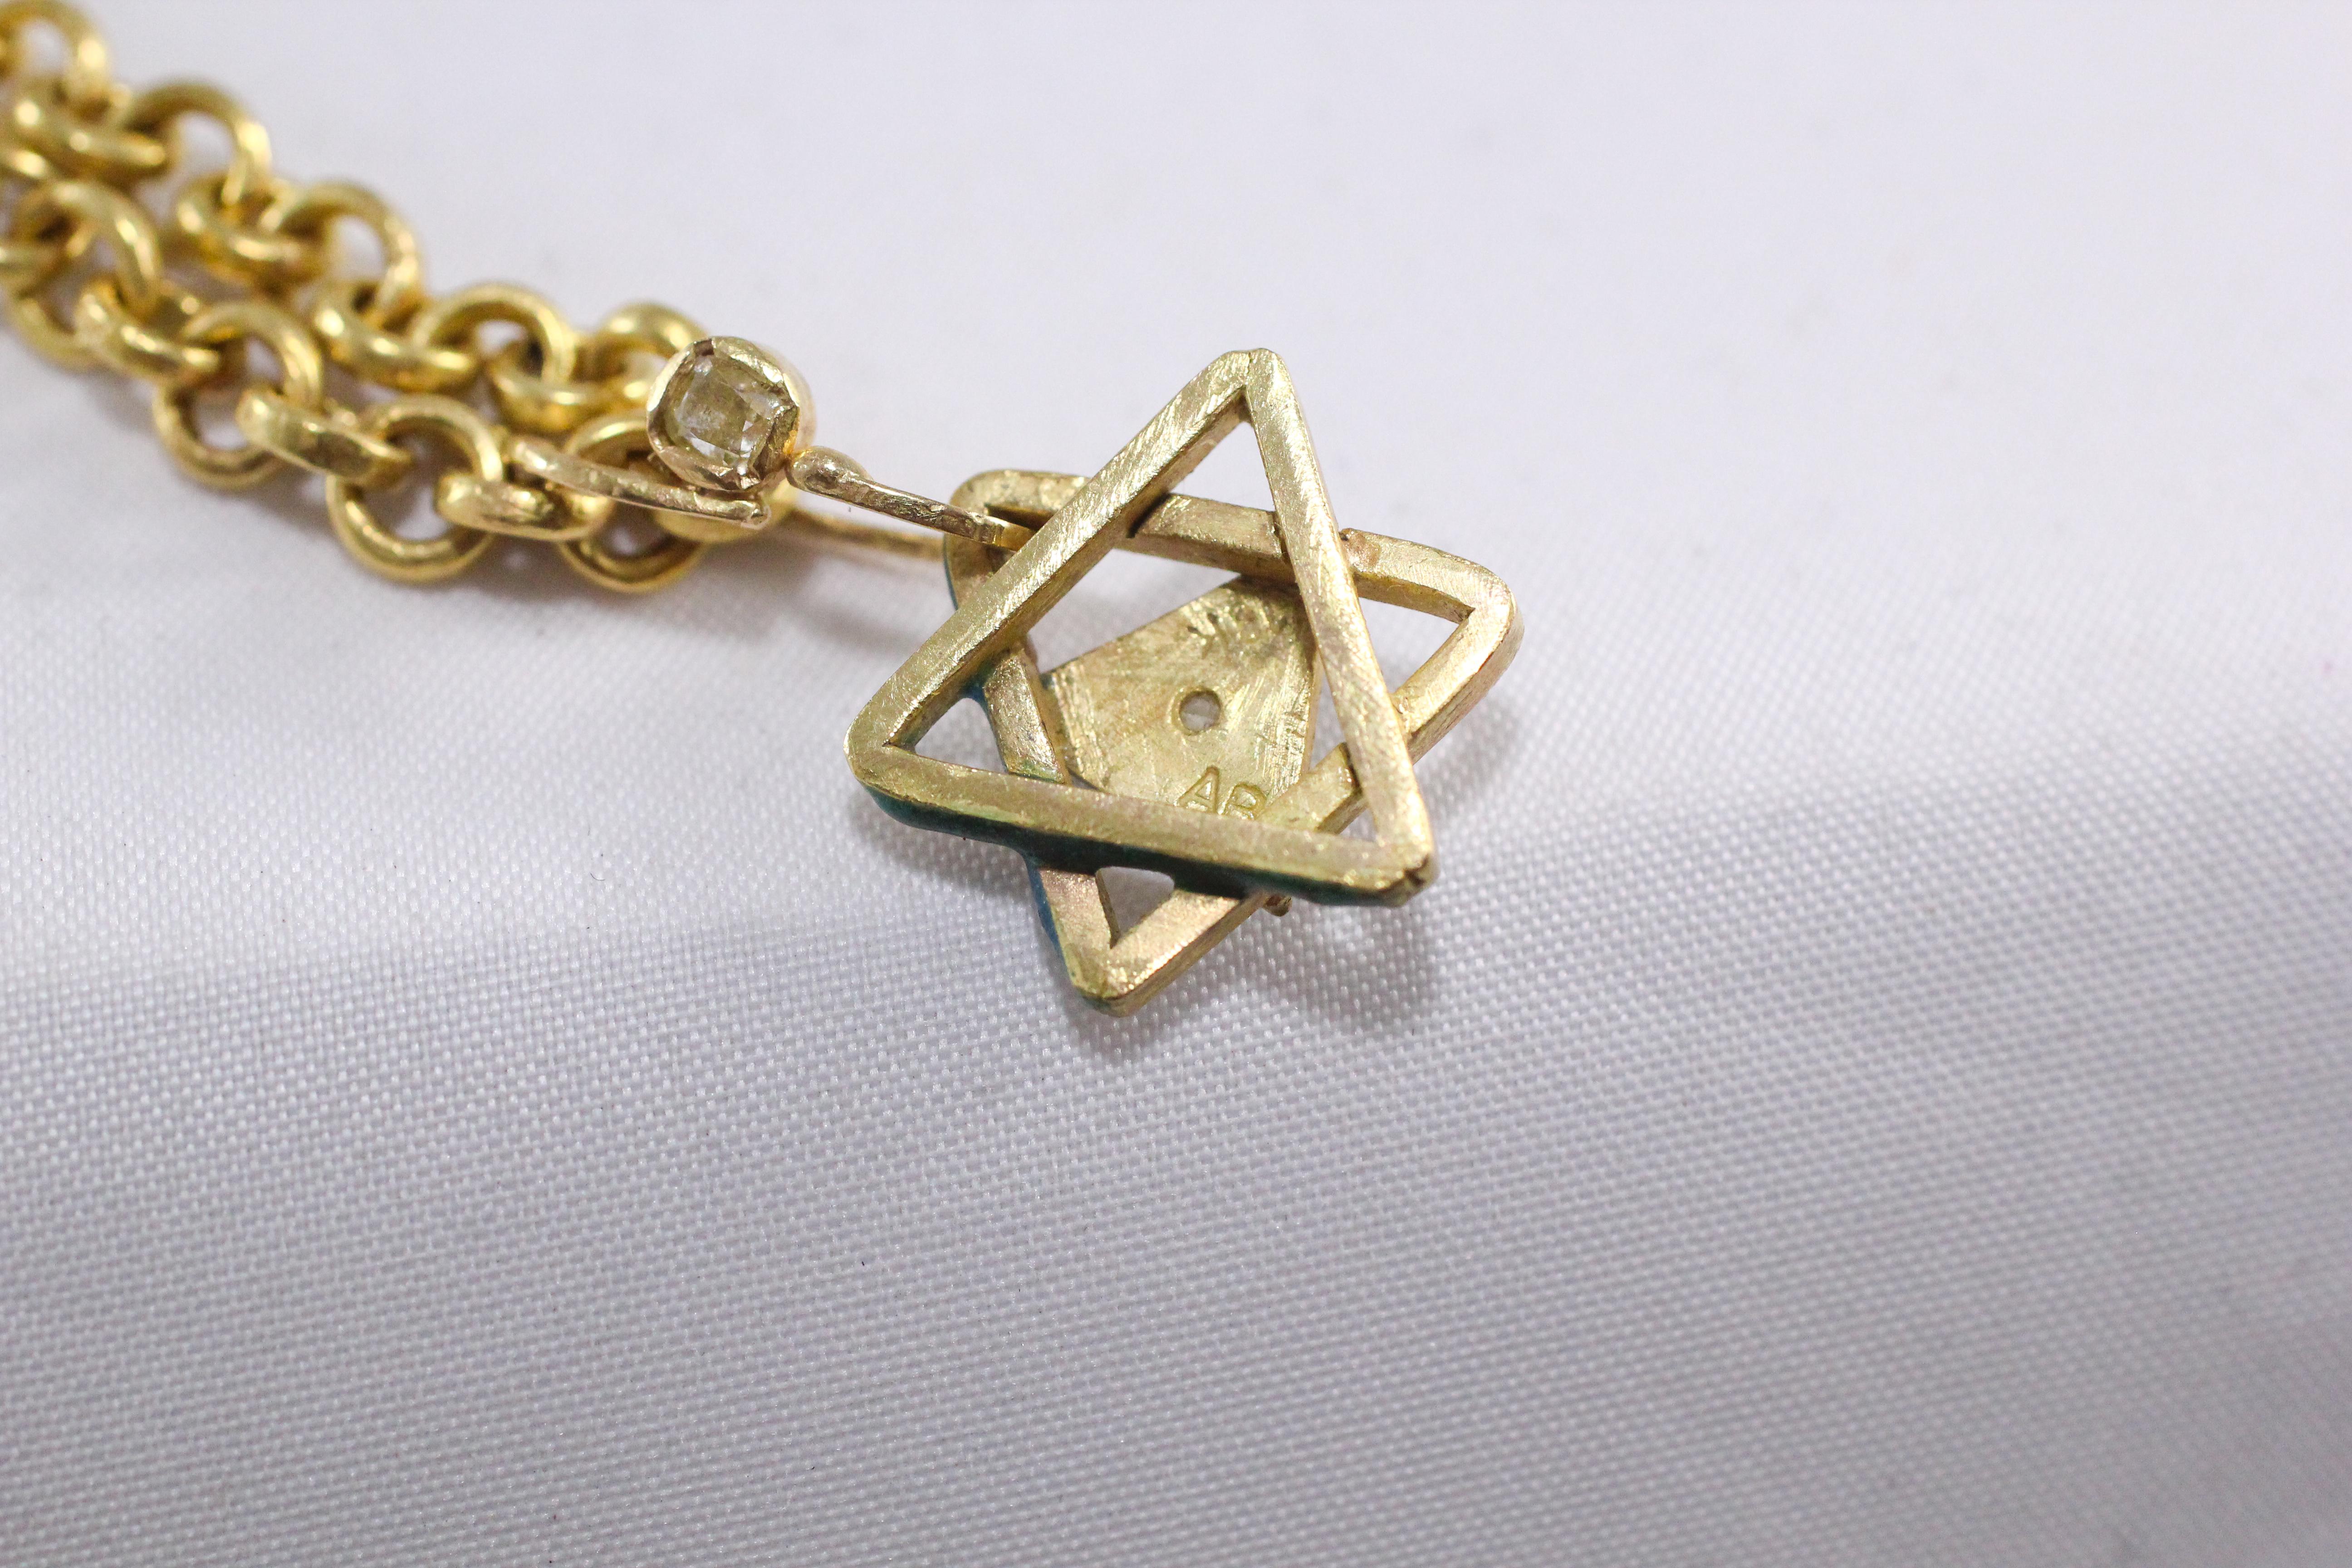 Enamel Magen David 18K Gold Chain Necklace Diamond Enhancer and Toggle Clasp For Sale 3